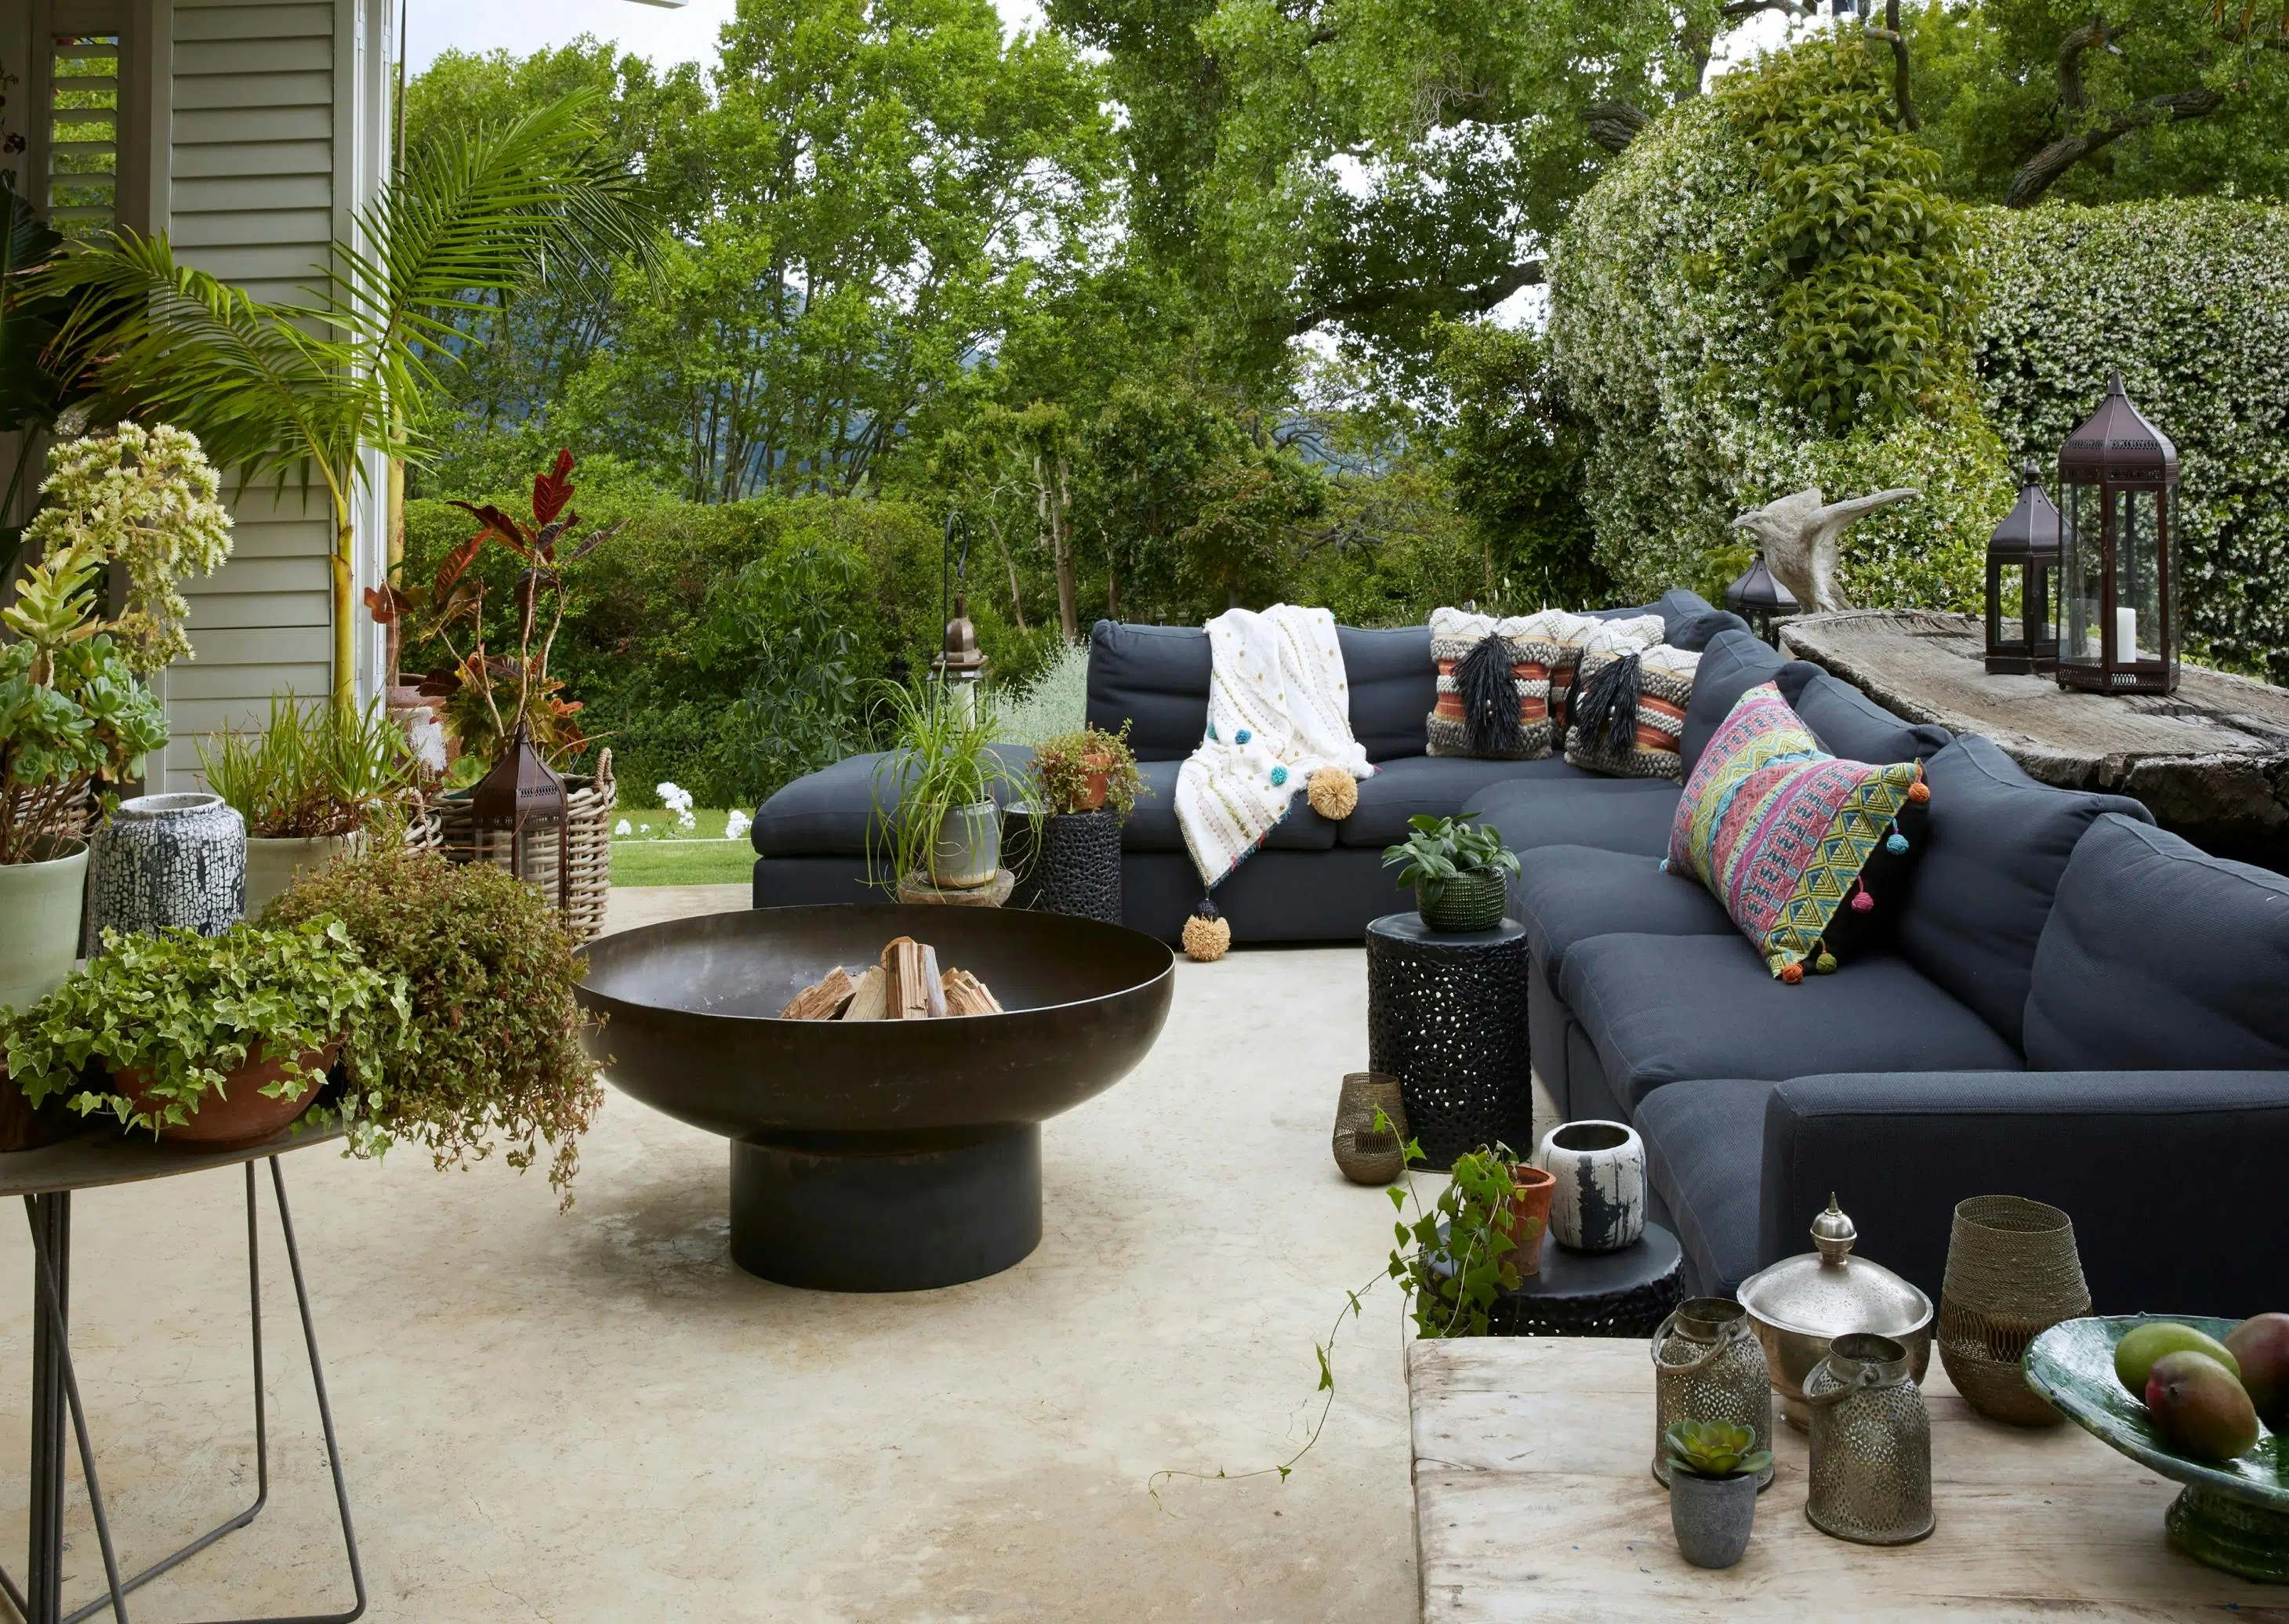 A Moroccan-inspired fire pit is surrounded by an outdoor sofa and lush greenery.